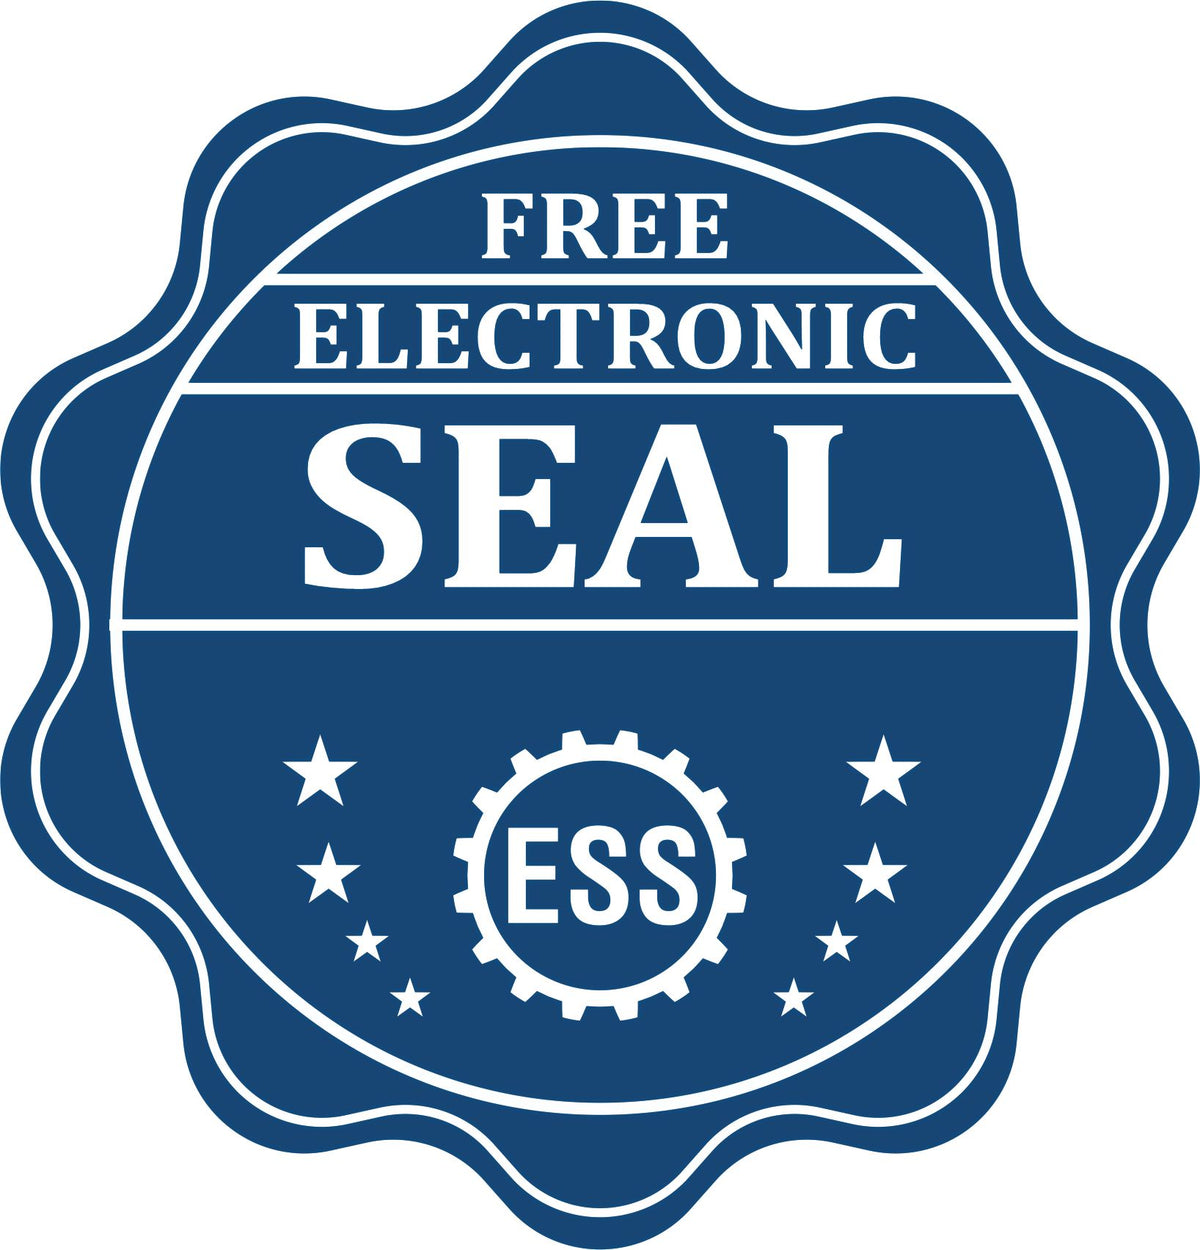 A badge showing a free electronic seal for the Premium MaxLight Pre-Inked Wyoming Landscape Architectural Stamp with stars and the ESS gear on the emblem.